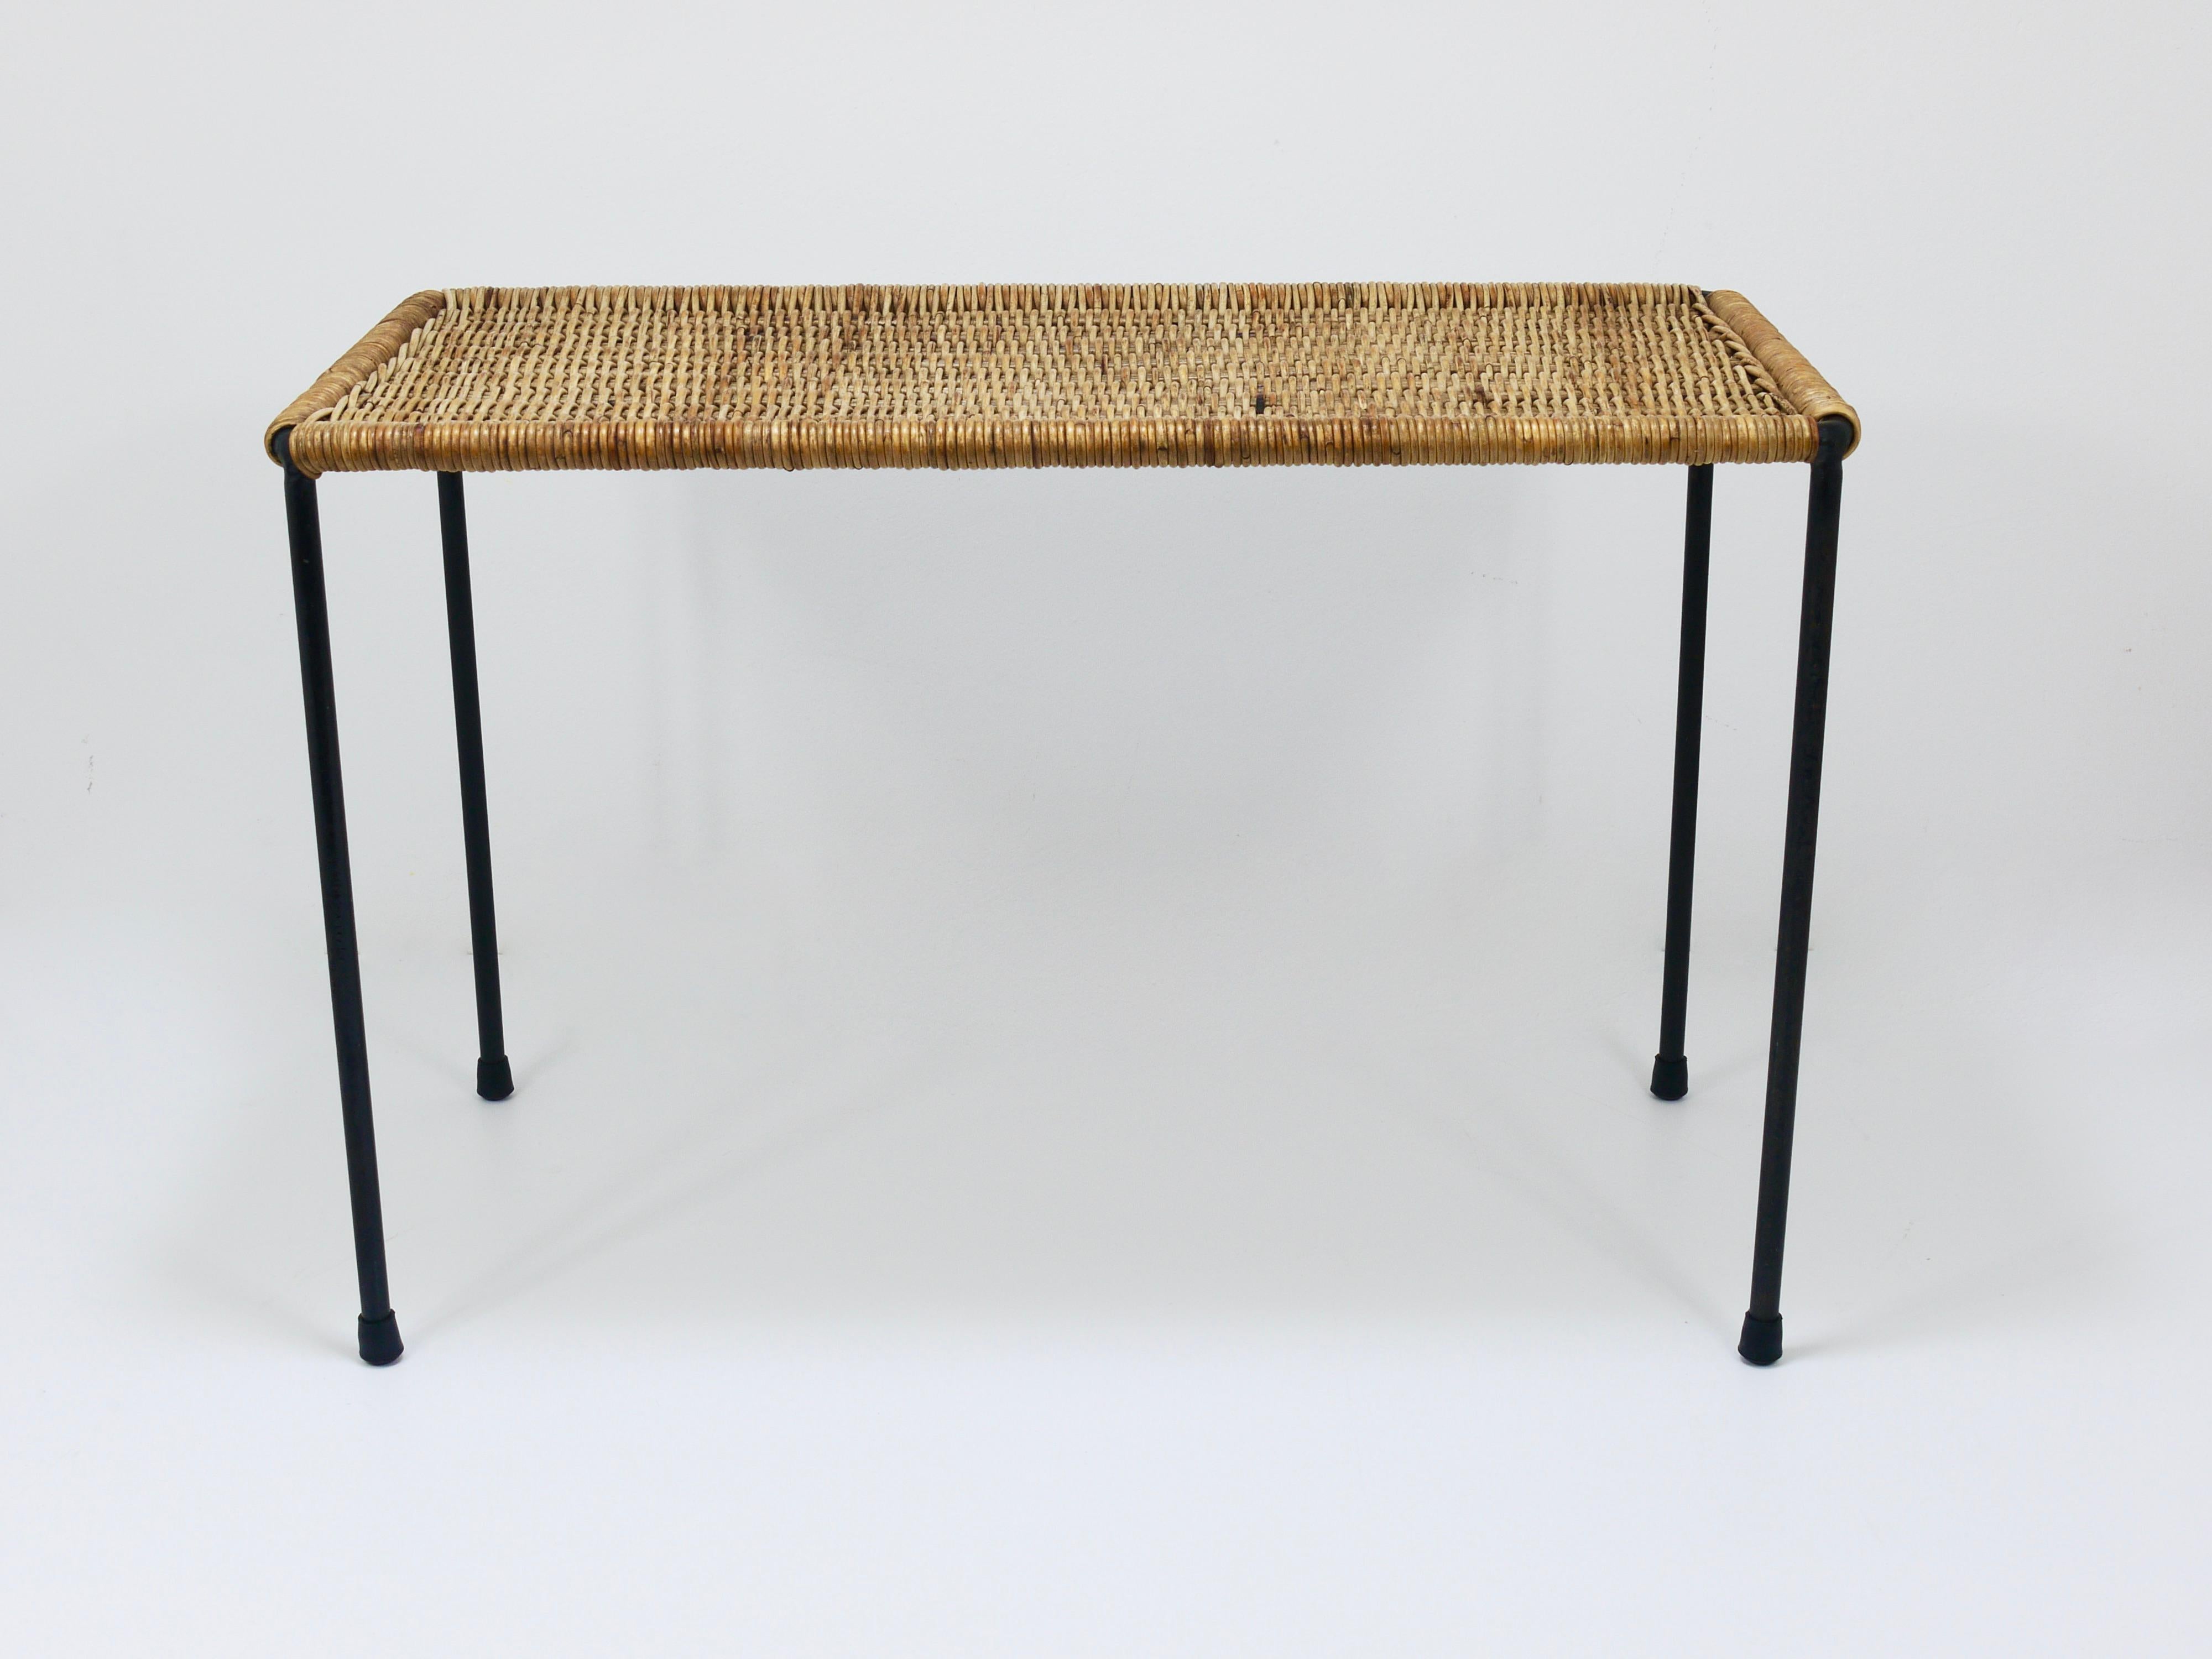 A beautiful rectangular Mid-Century side table / bench from the 1950s. This authentic vintage minimalistic piece was designed by Carl Auböck from Vienna and was crafted by Werkstätte Auböck, hand-woven from wicker. It features a black-finished iron